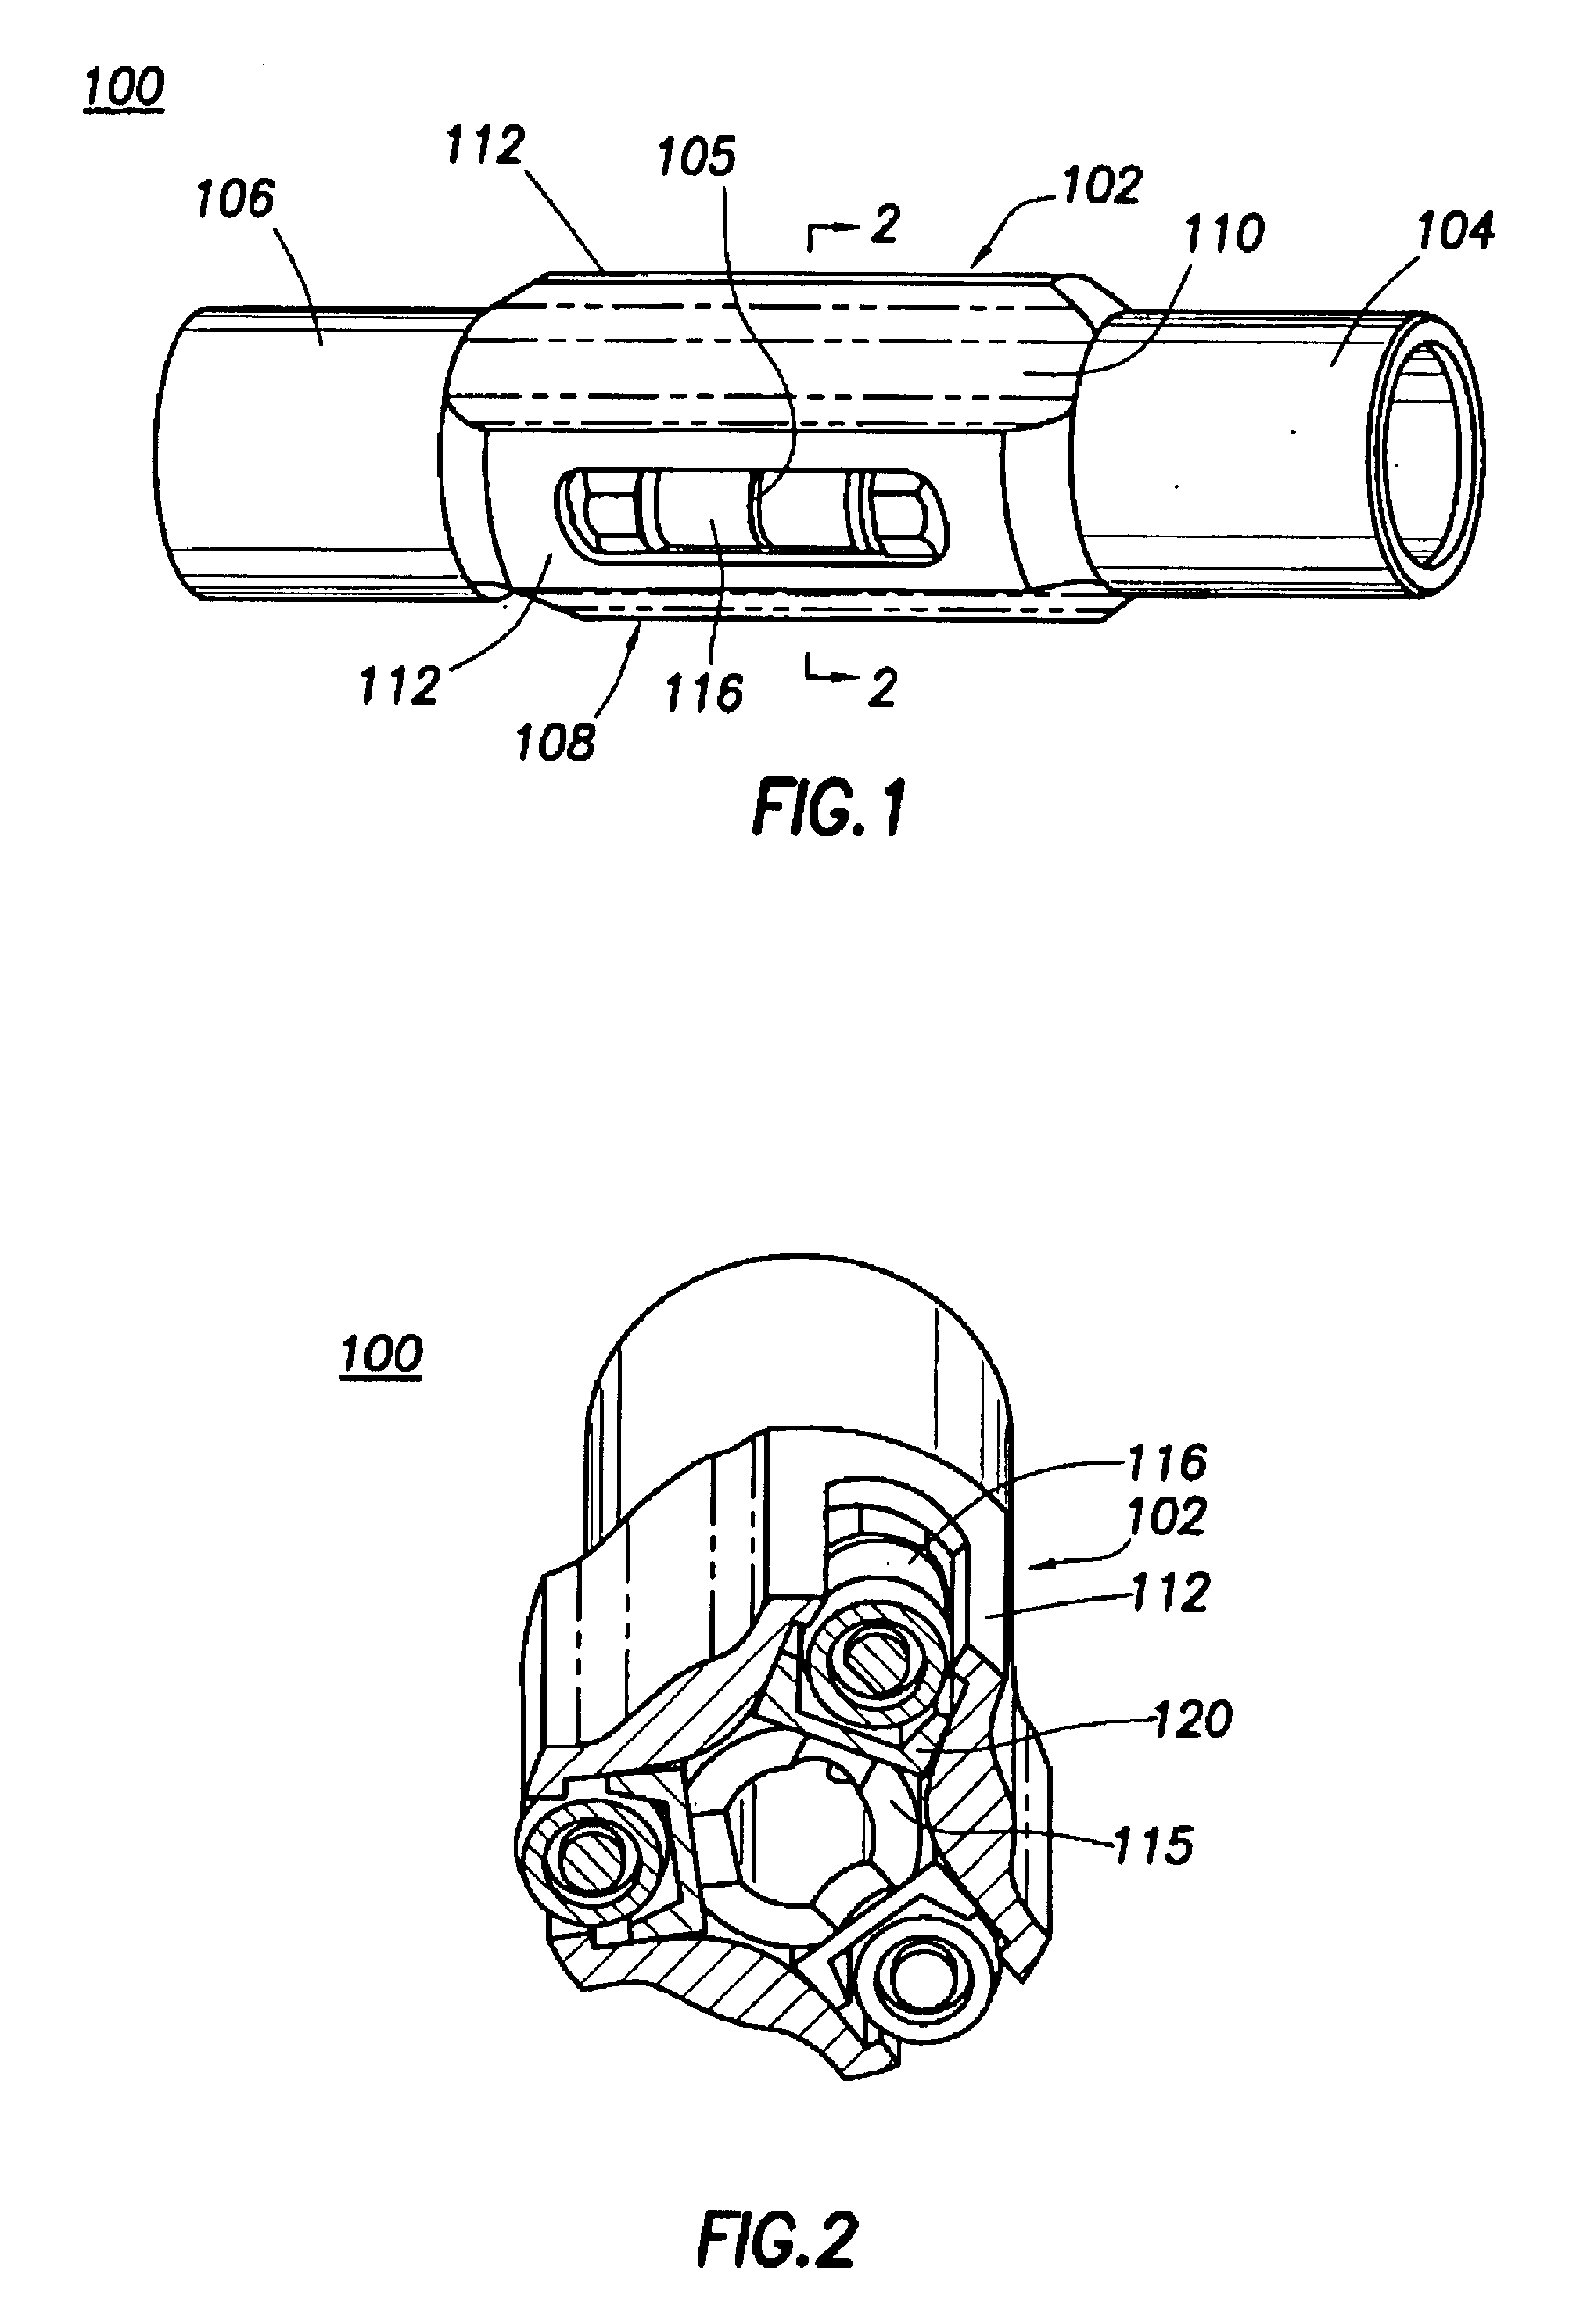 Apparatus and methods for separating and joining tubulars in a wellbore